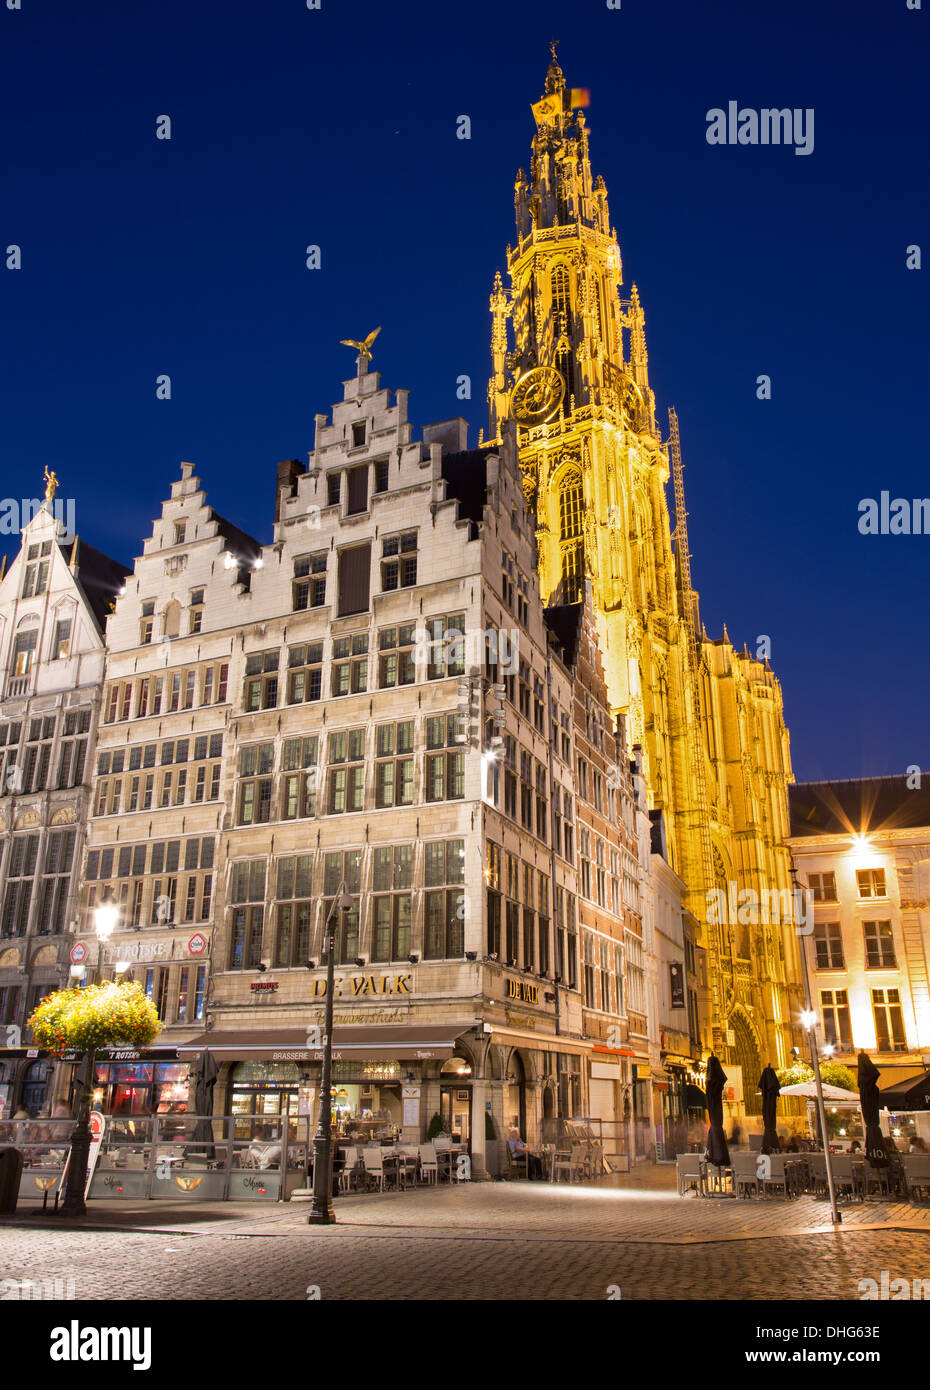 ANTWERP, BELGIUM - SEPTEMBER 4: Towers of cathedral of Our Lady in morning dusk and Grote Markt Stock Photo